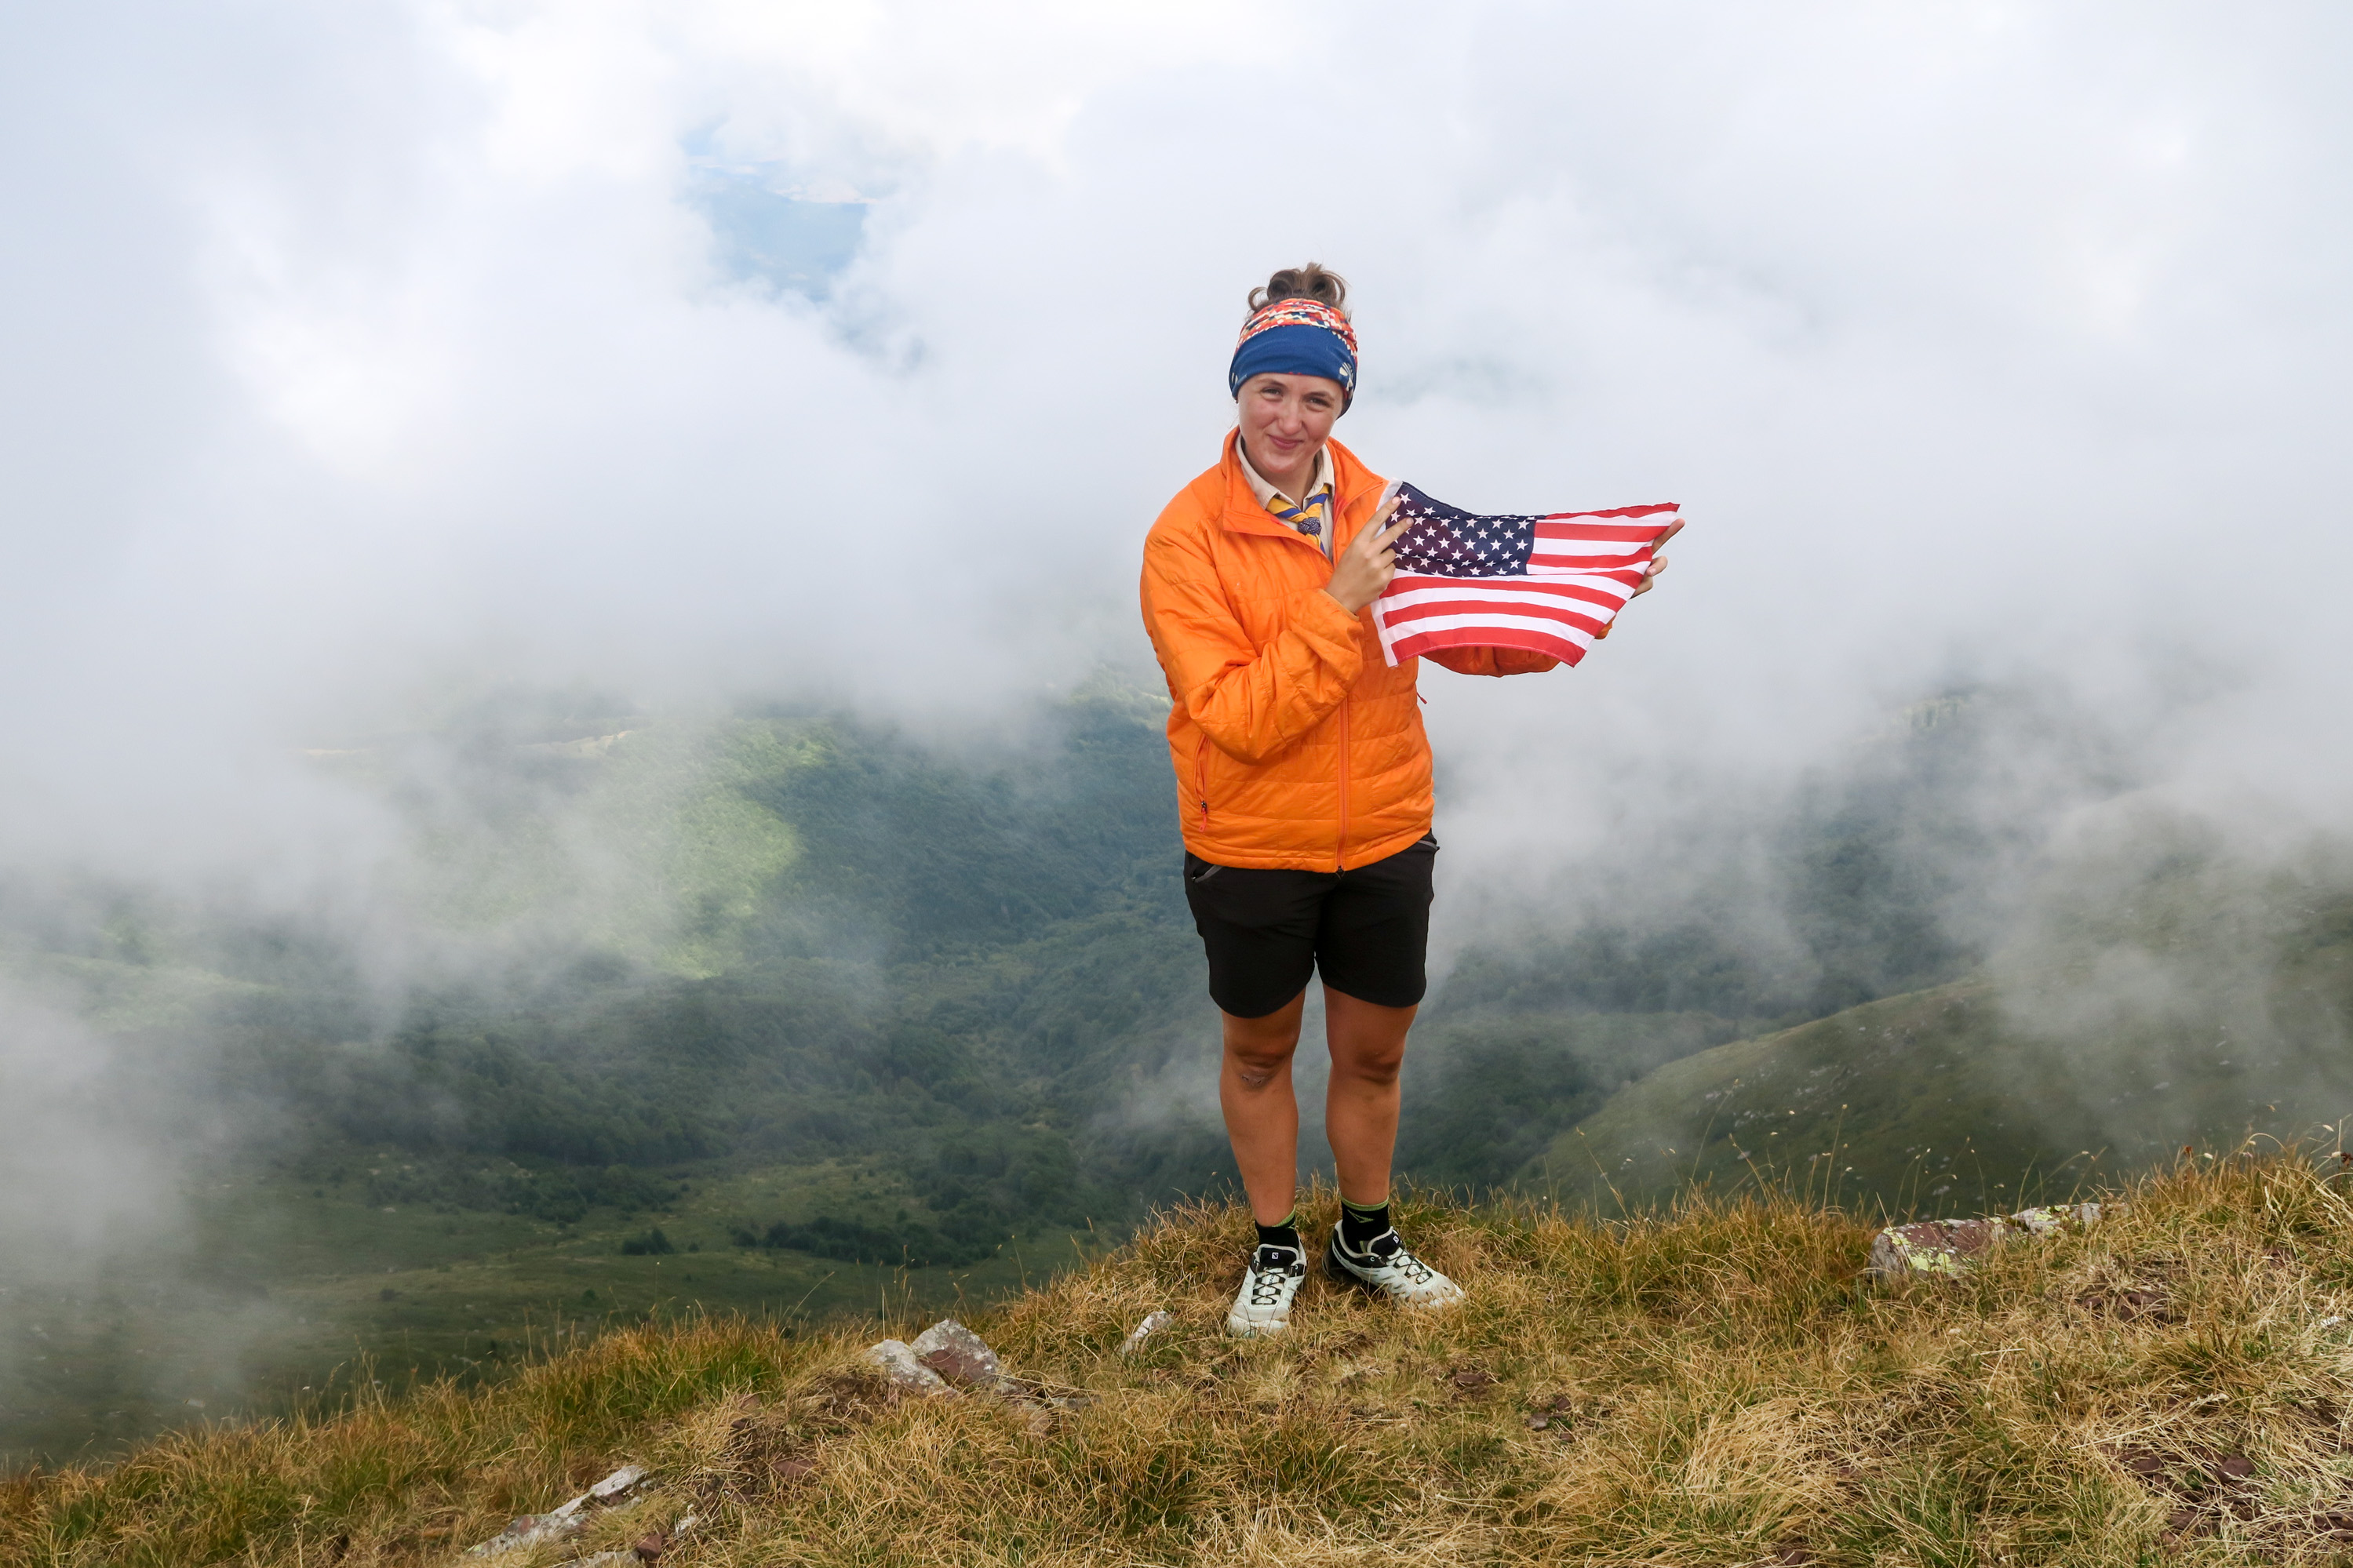 Carla standing atop mountain, holding USA flag, cloudy skies in background